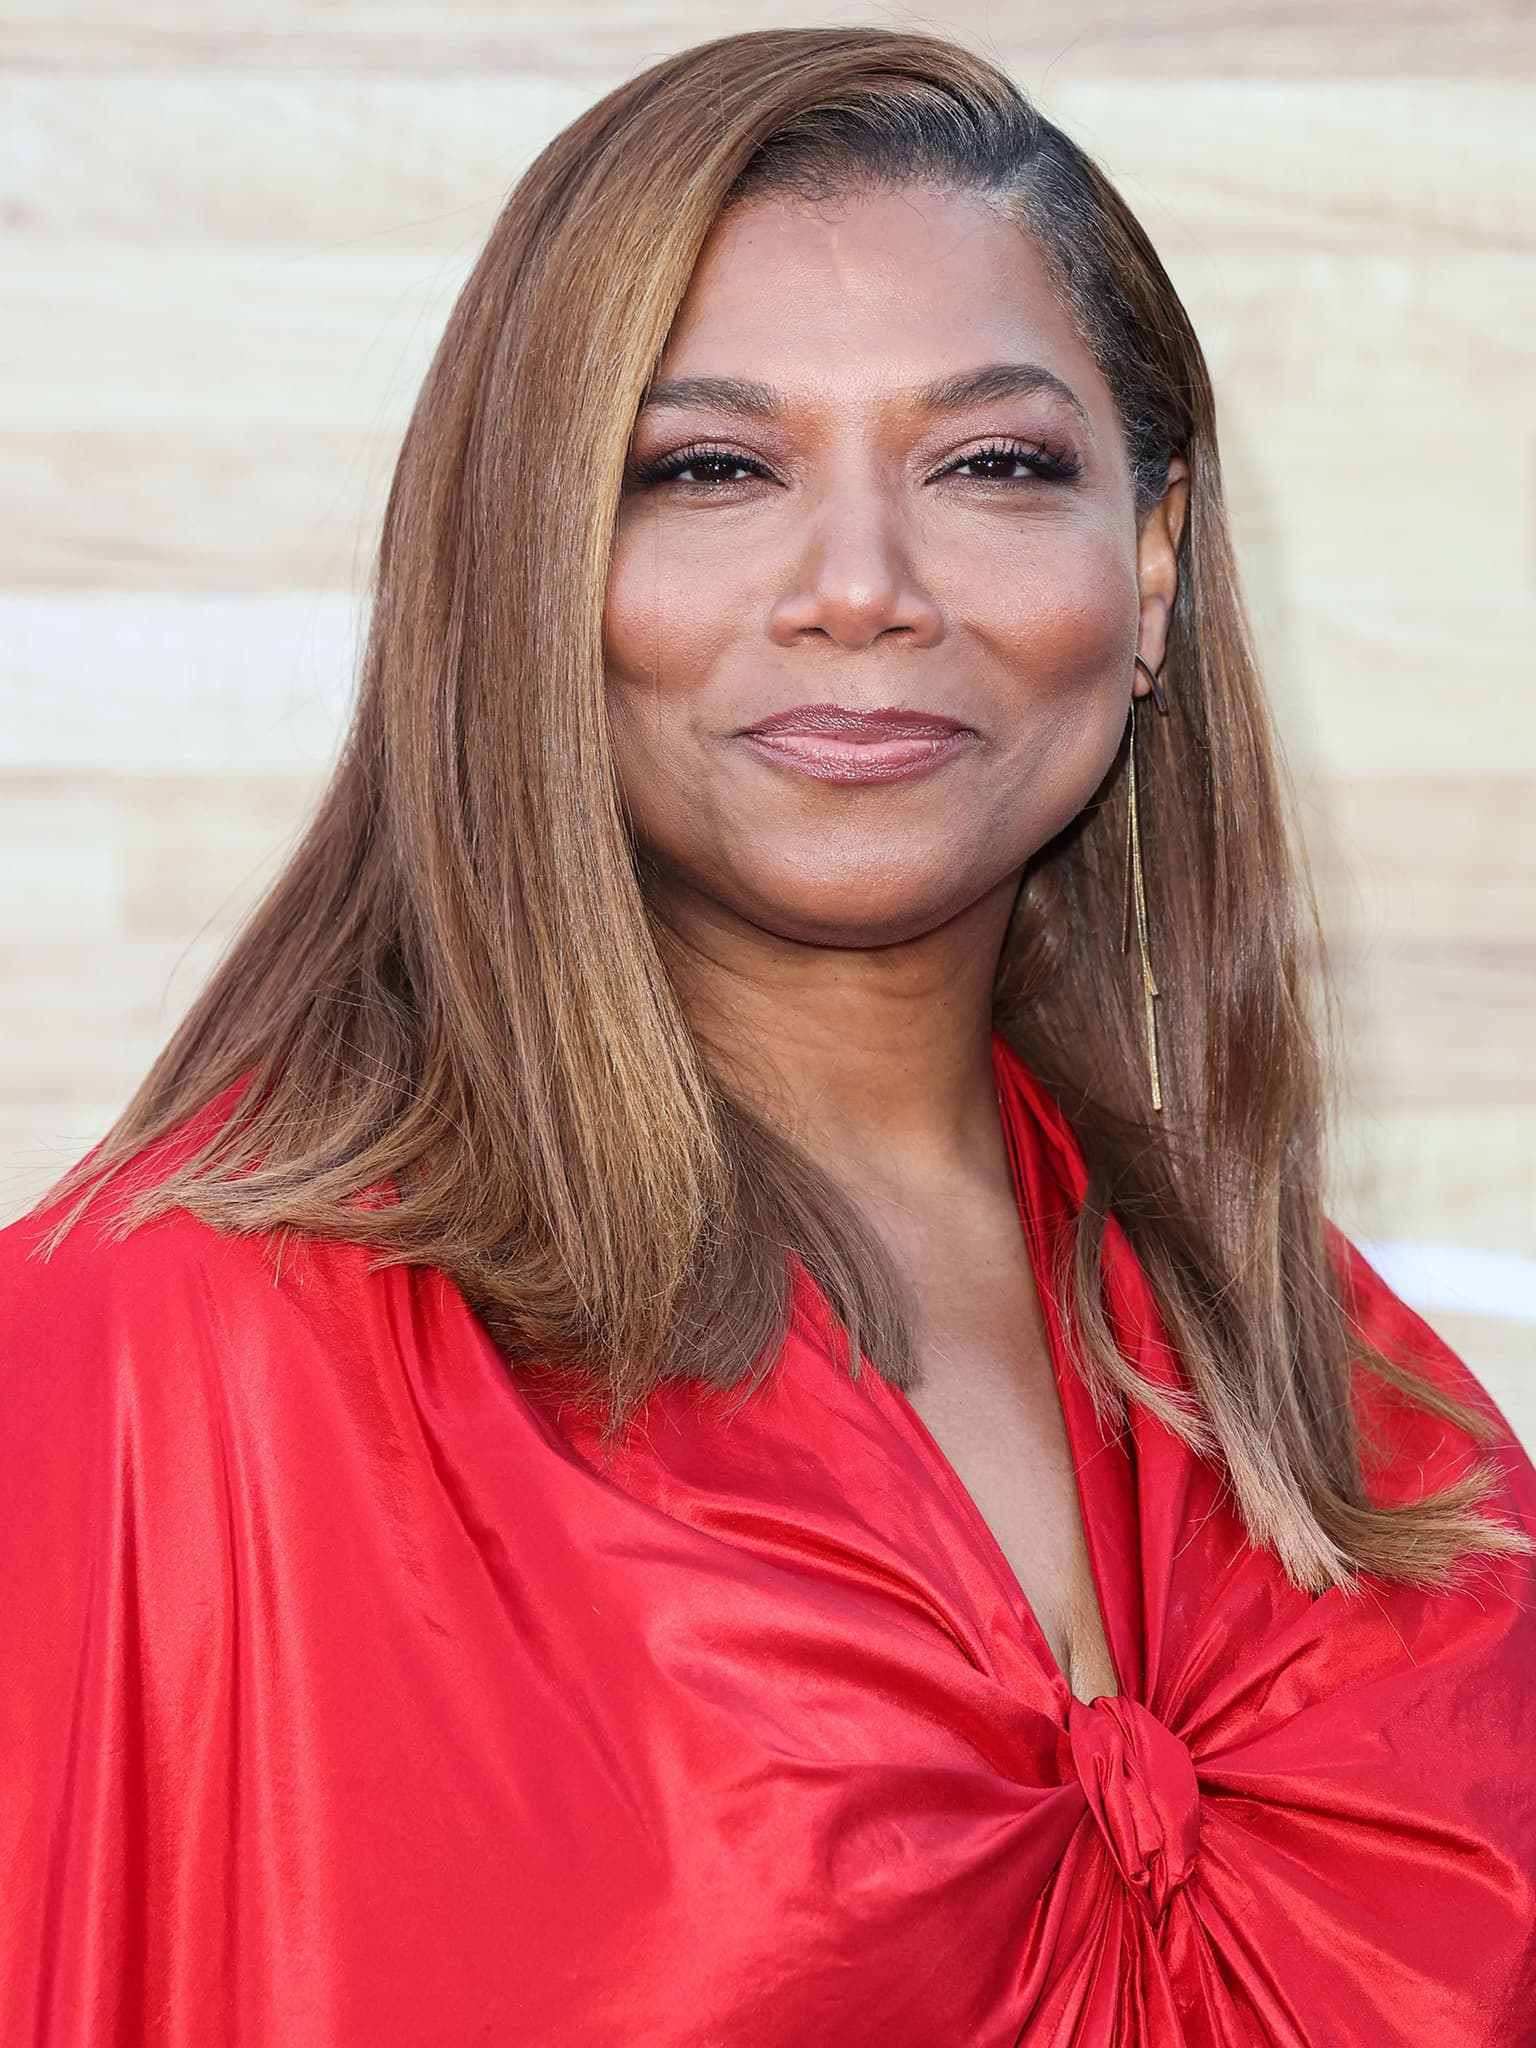 Queen Latifah at the premiere of Netflix's Hustle at the Regency Village Theatre in Los Angeles on June 1, 2022